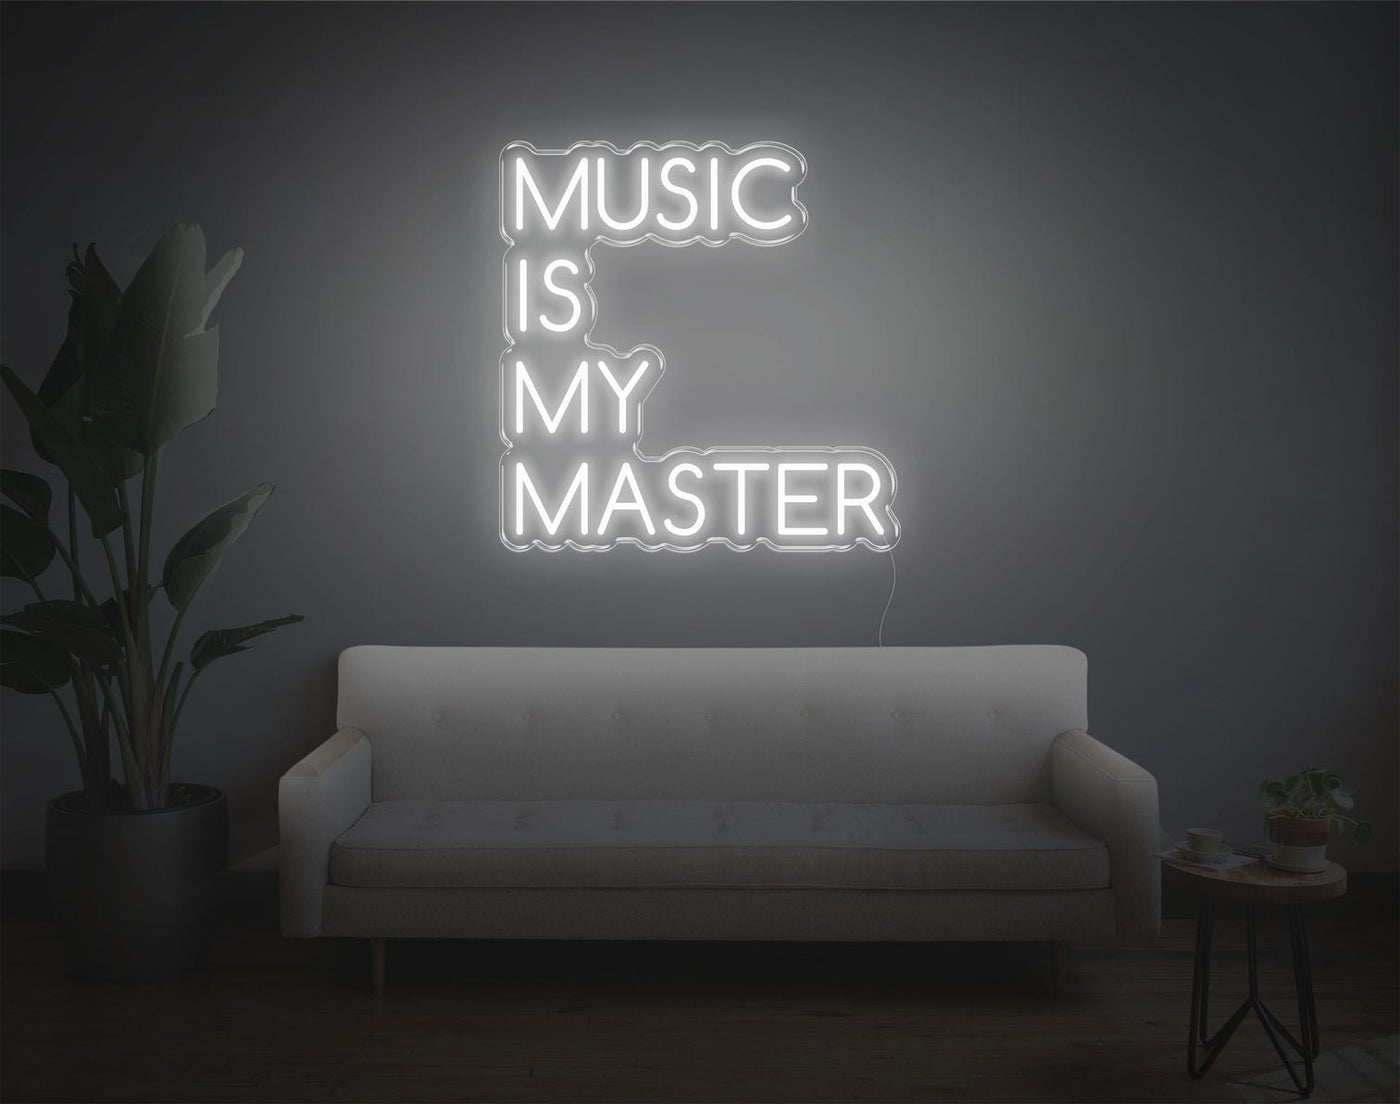 Music Is My Master LED Neon Sign - 20inch x 19inchWhite